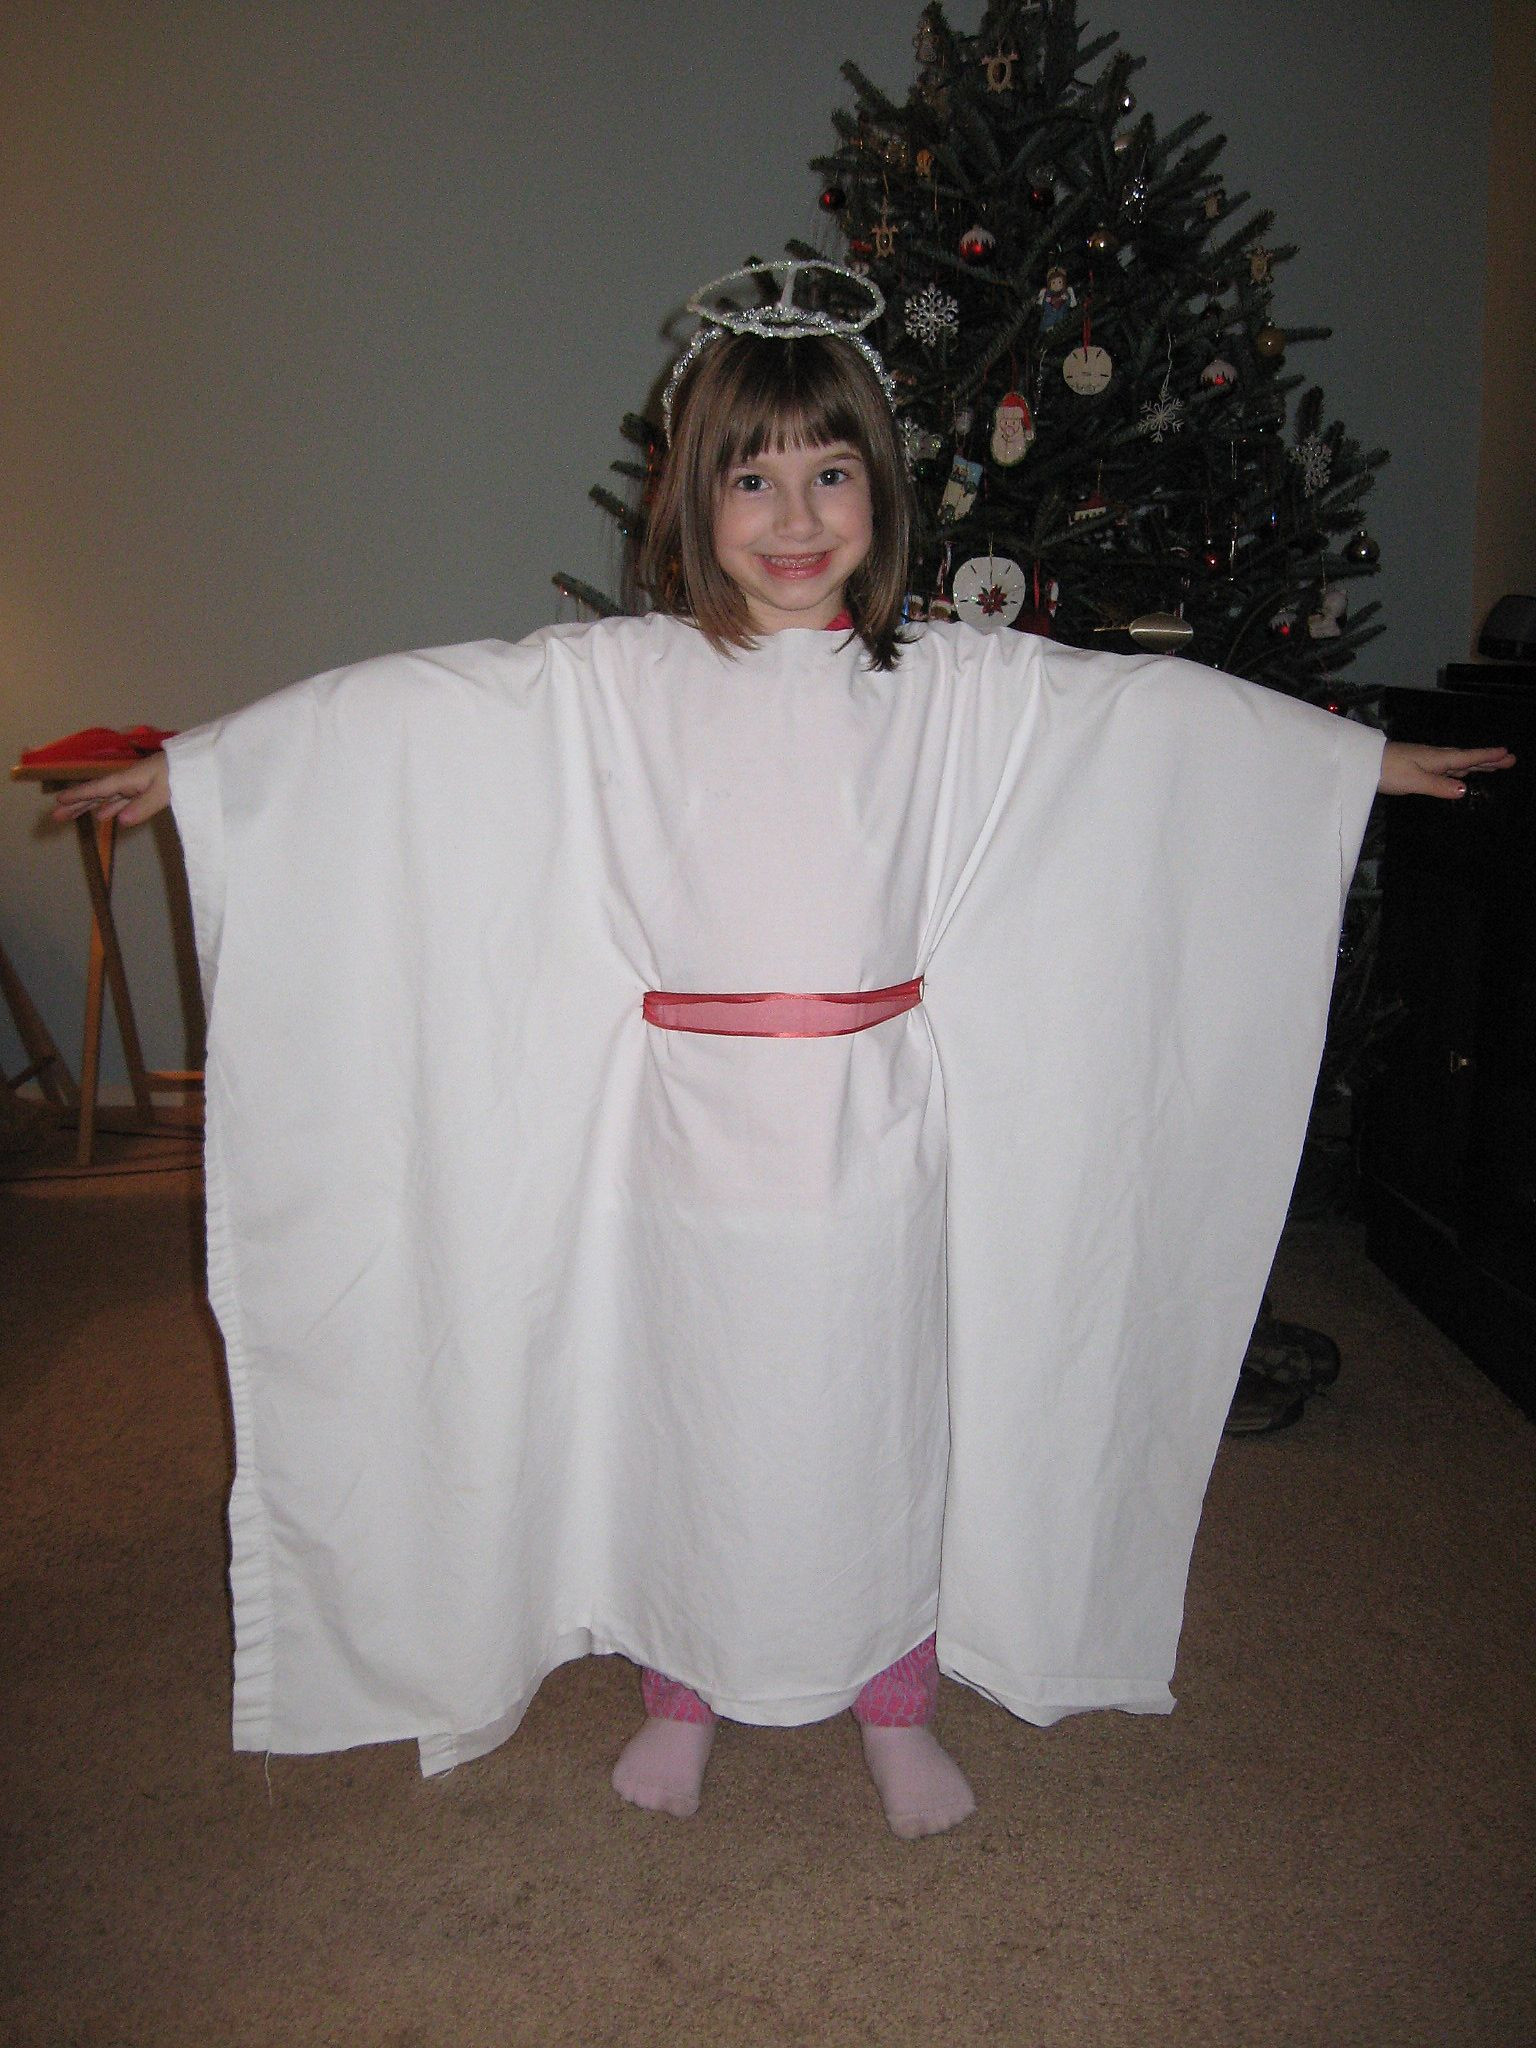 DIY Nativity Costumes
 No Sowing Angel Costume White material I used a sheet